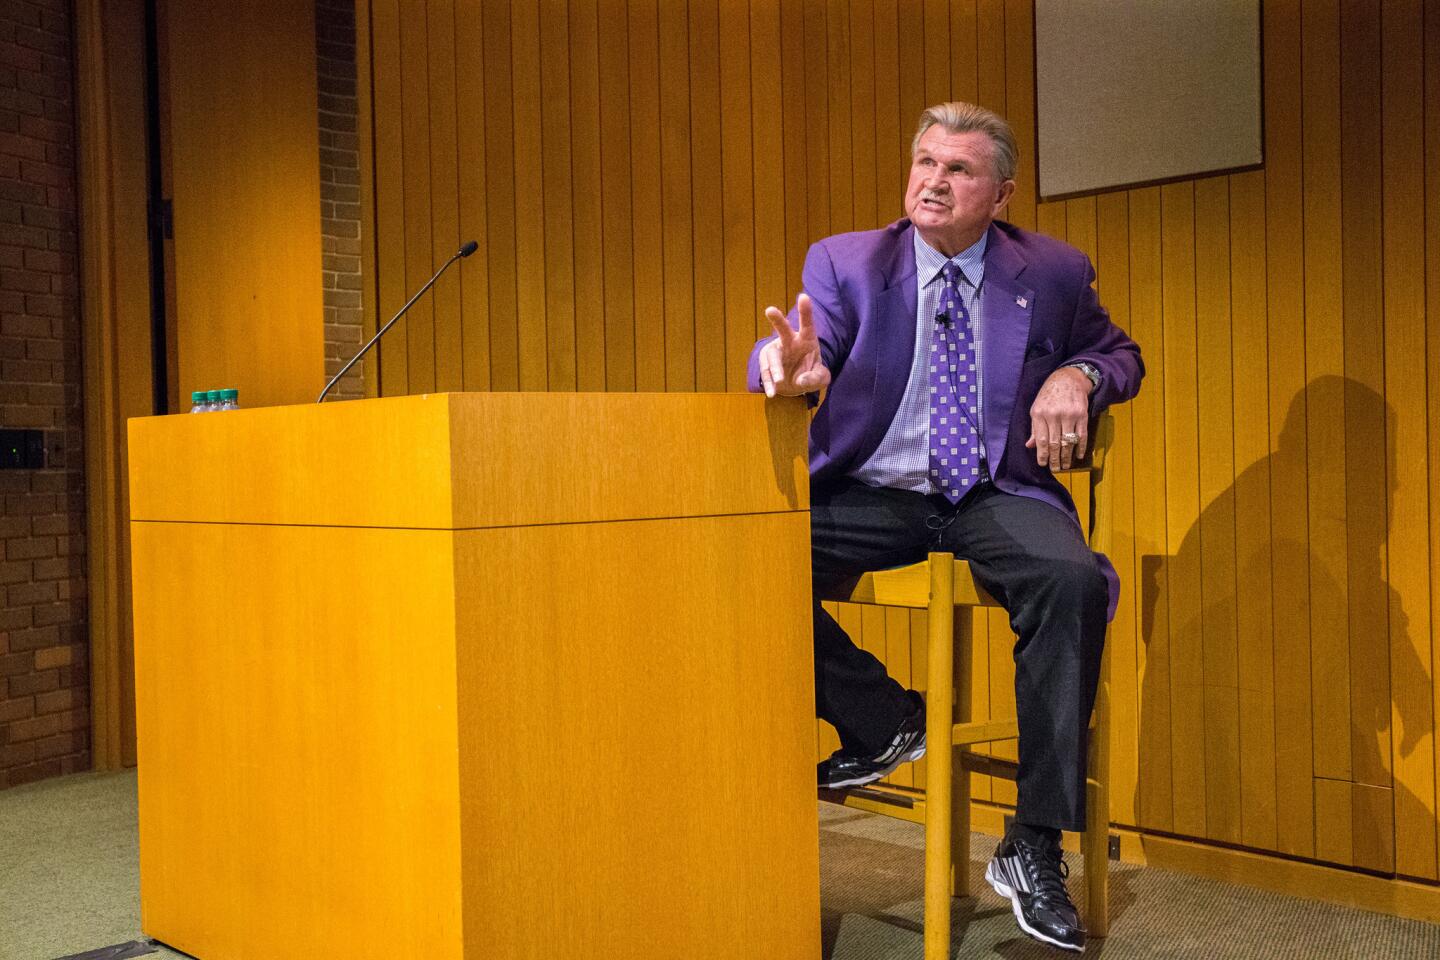 Mike Ditka addresses the IHSA football coaches in August 2015. Ditka and other football coaches speak about getting rid of contact during high school practices.